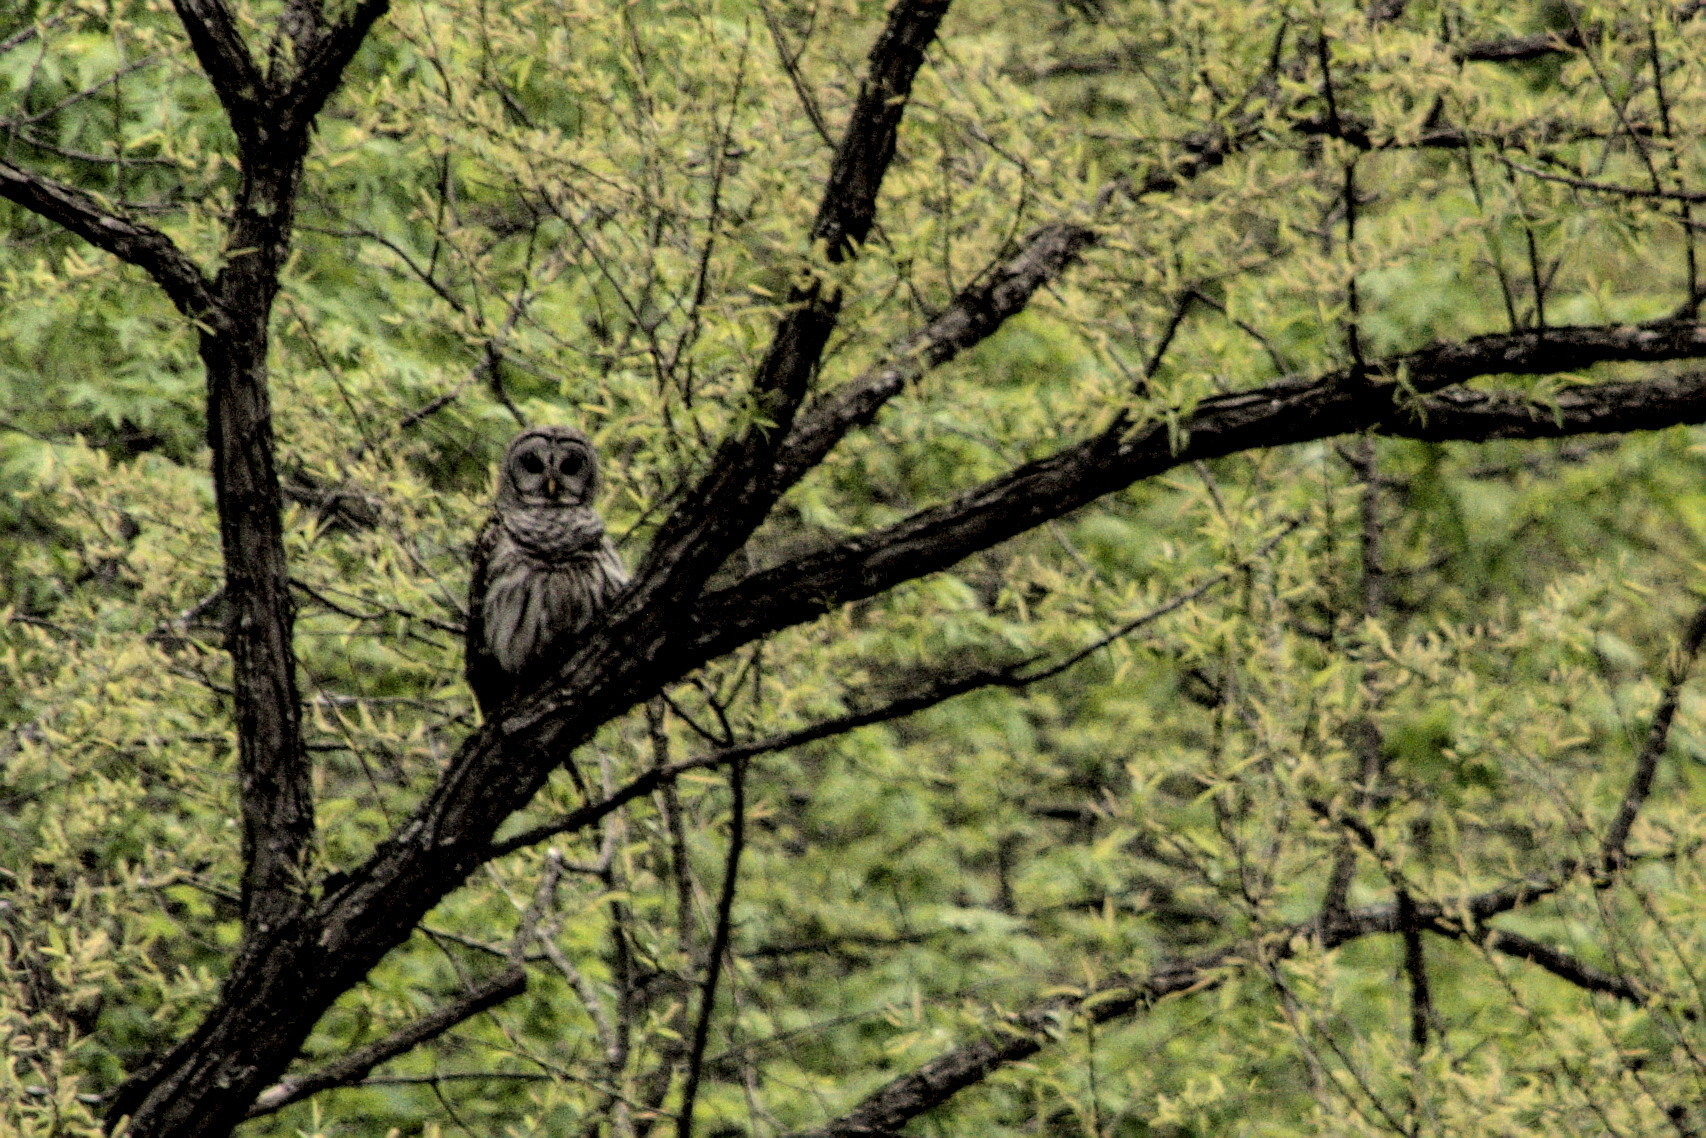 Barred Owl in the fork of a tree.